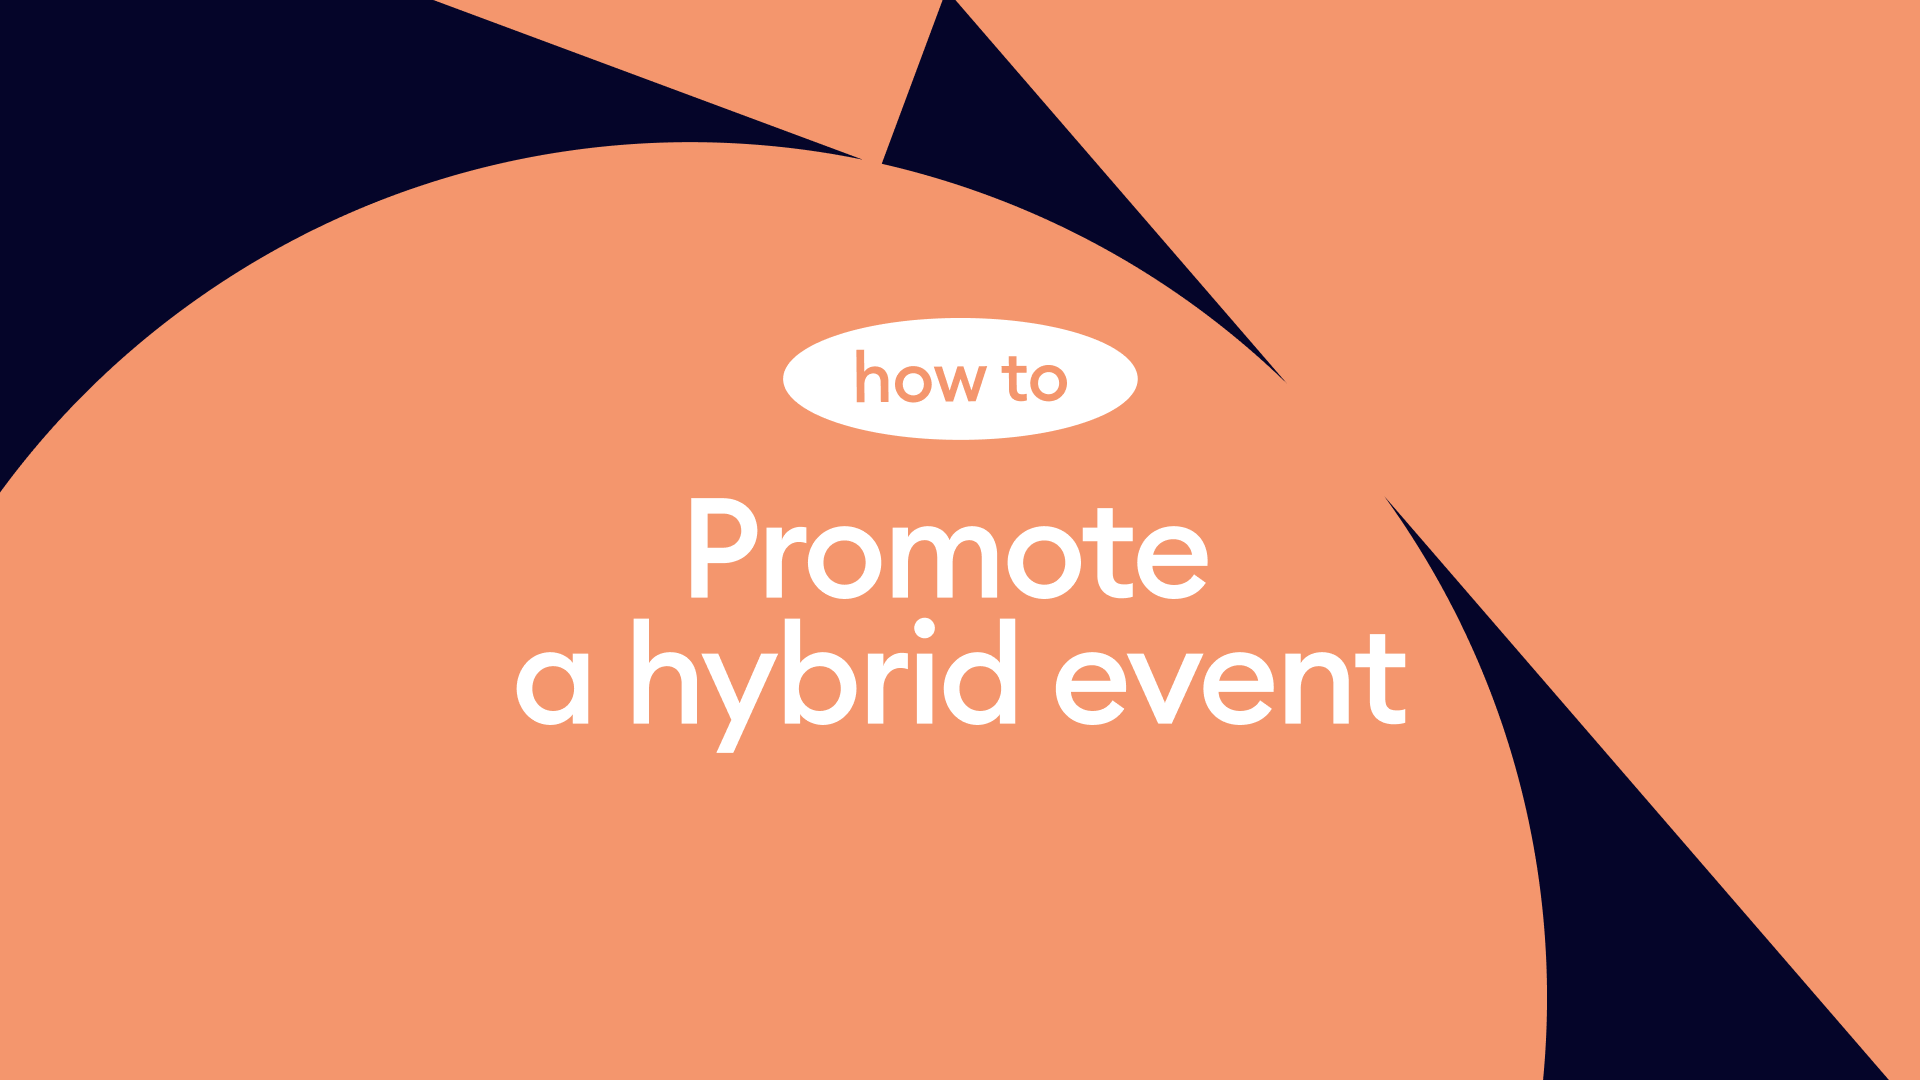 How to promote a hybrid event: 7 clever ways